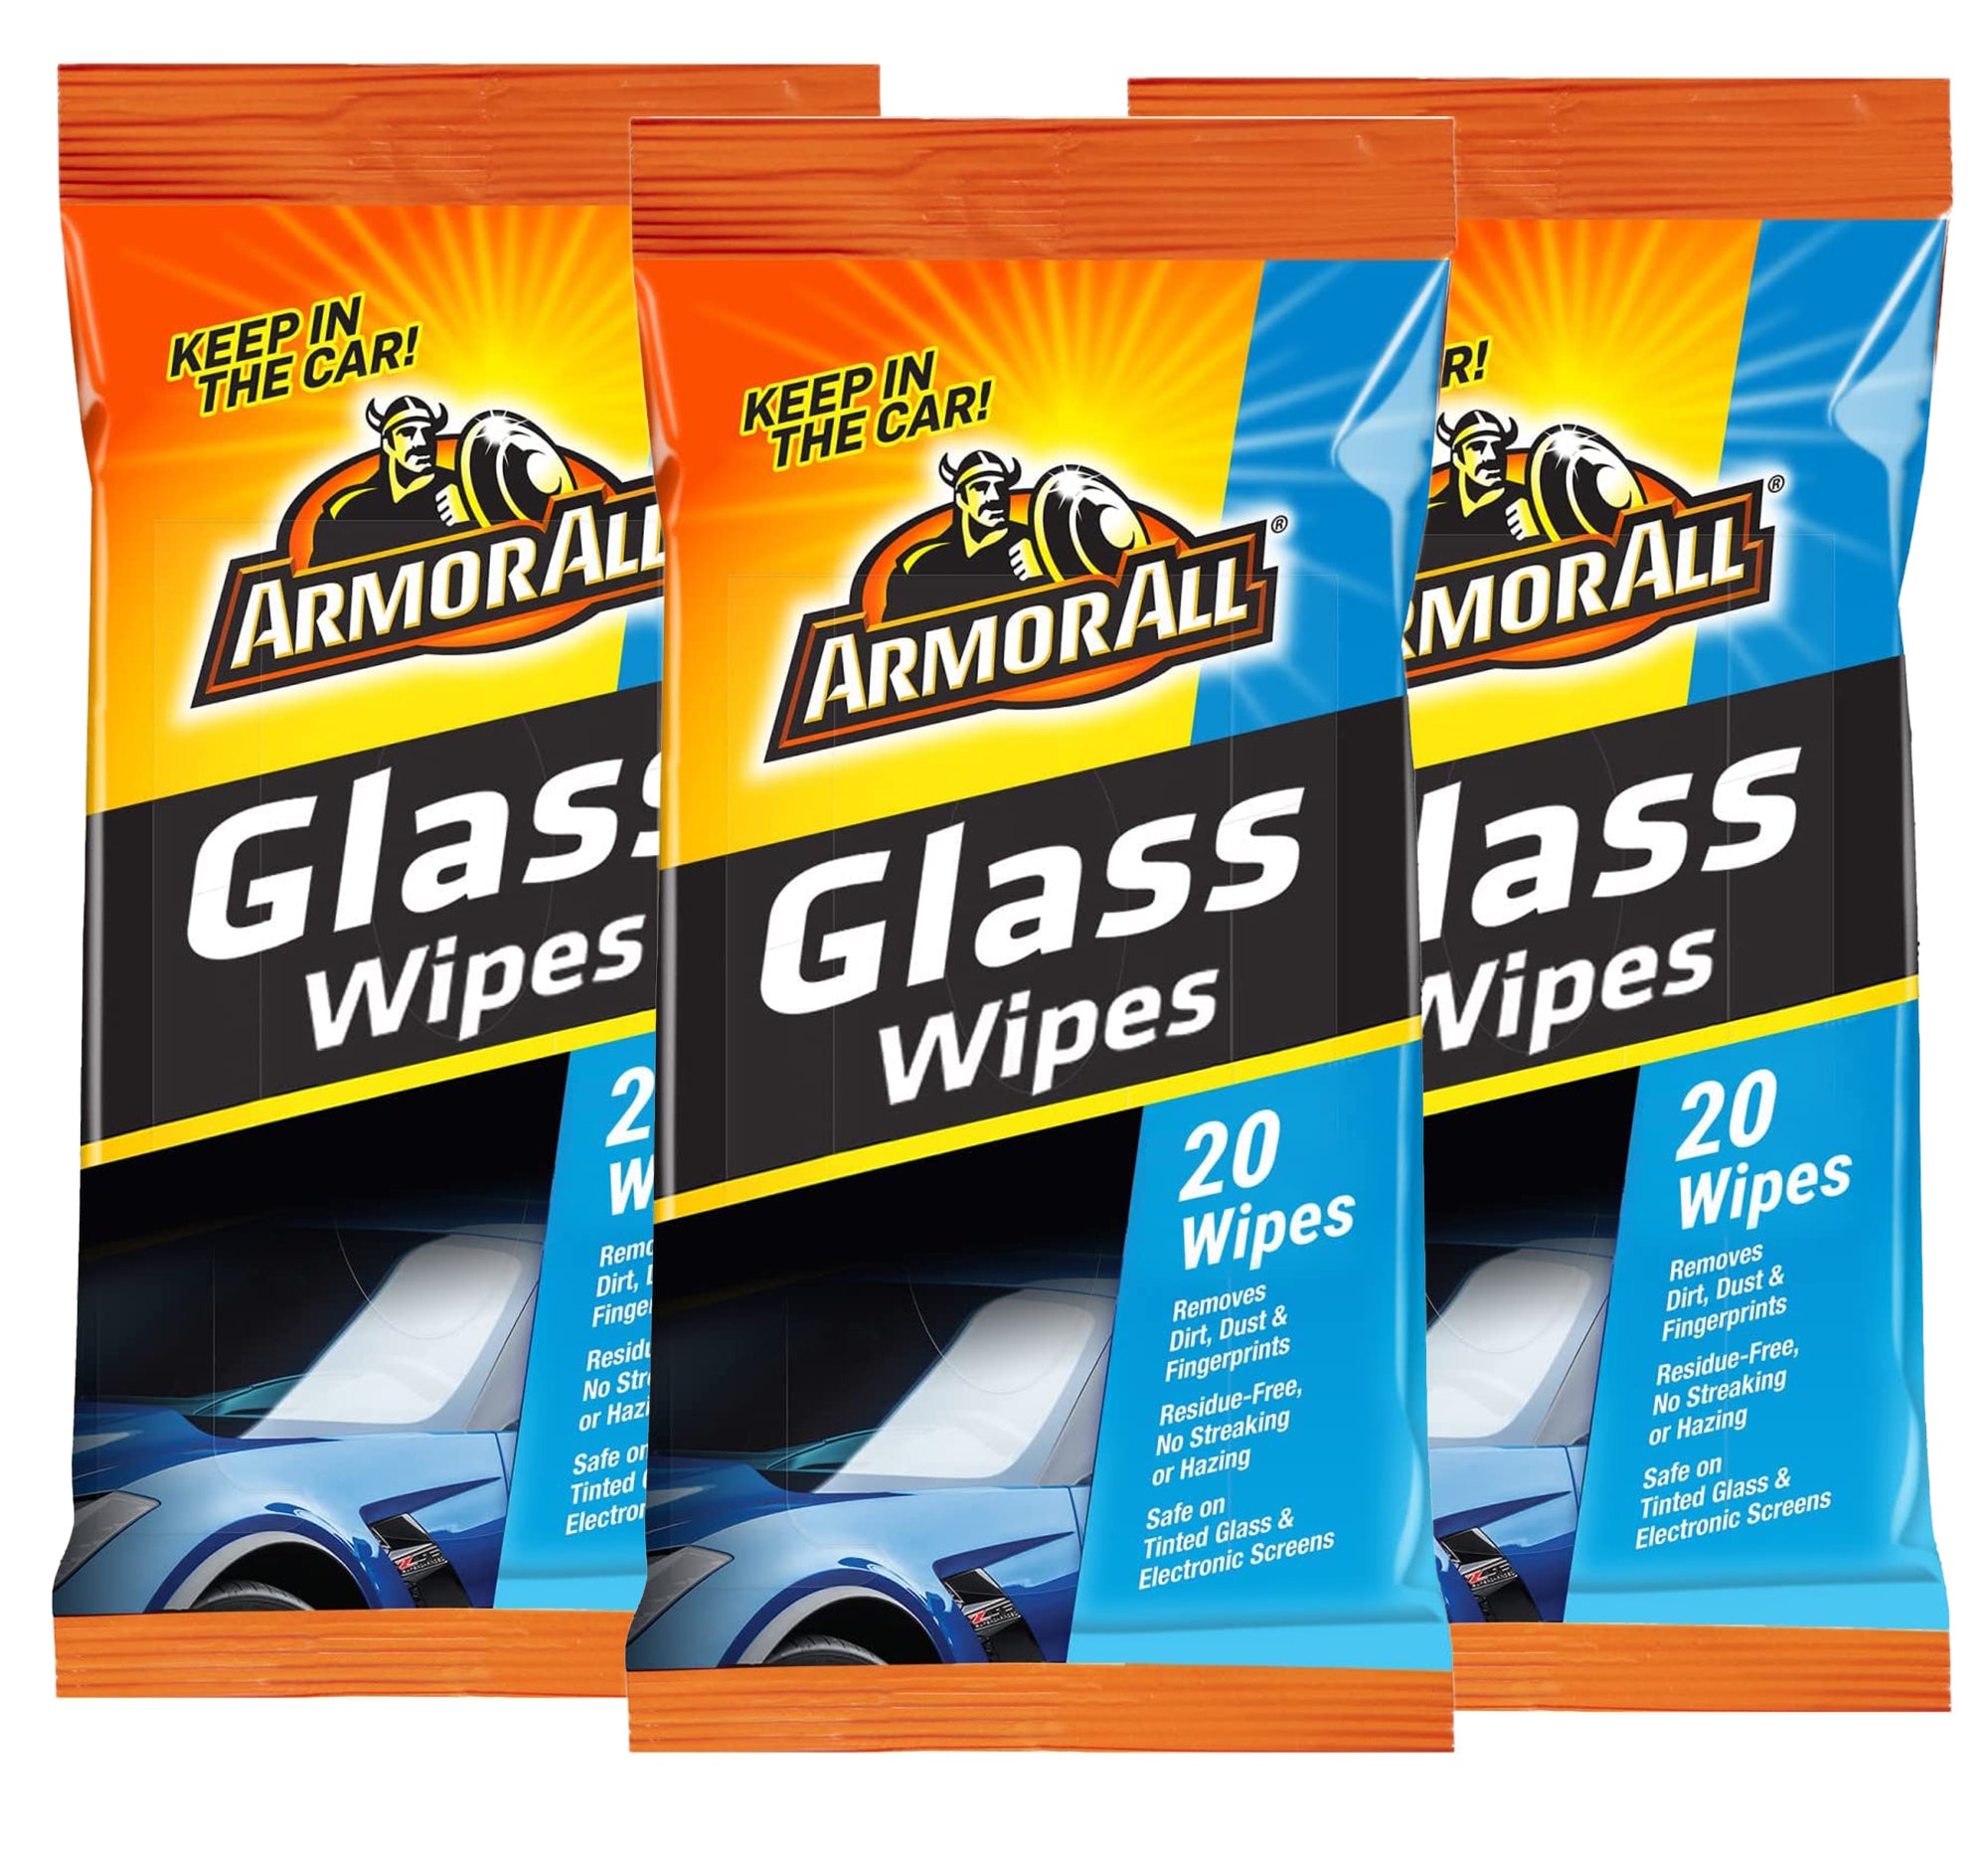 Armor All Car Glass Wipes, Auto Glass Cleaner Wipes for Dirt and